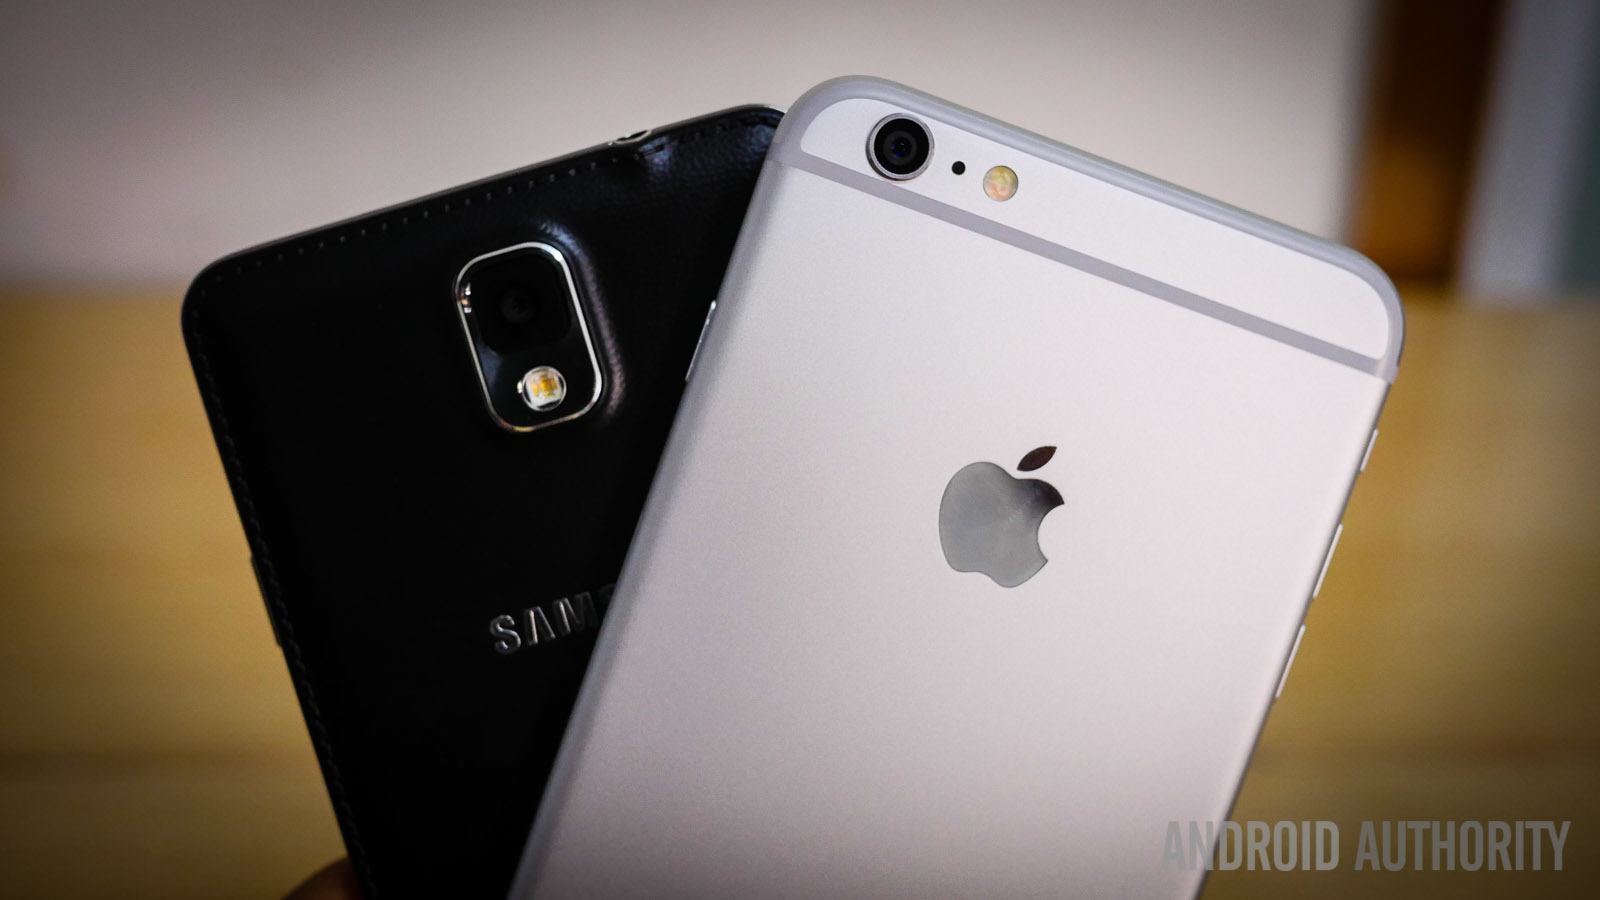 iphone 6 plus vs samsung galaxy note 3 quick look aa (11 of 20)